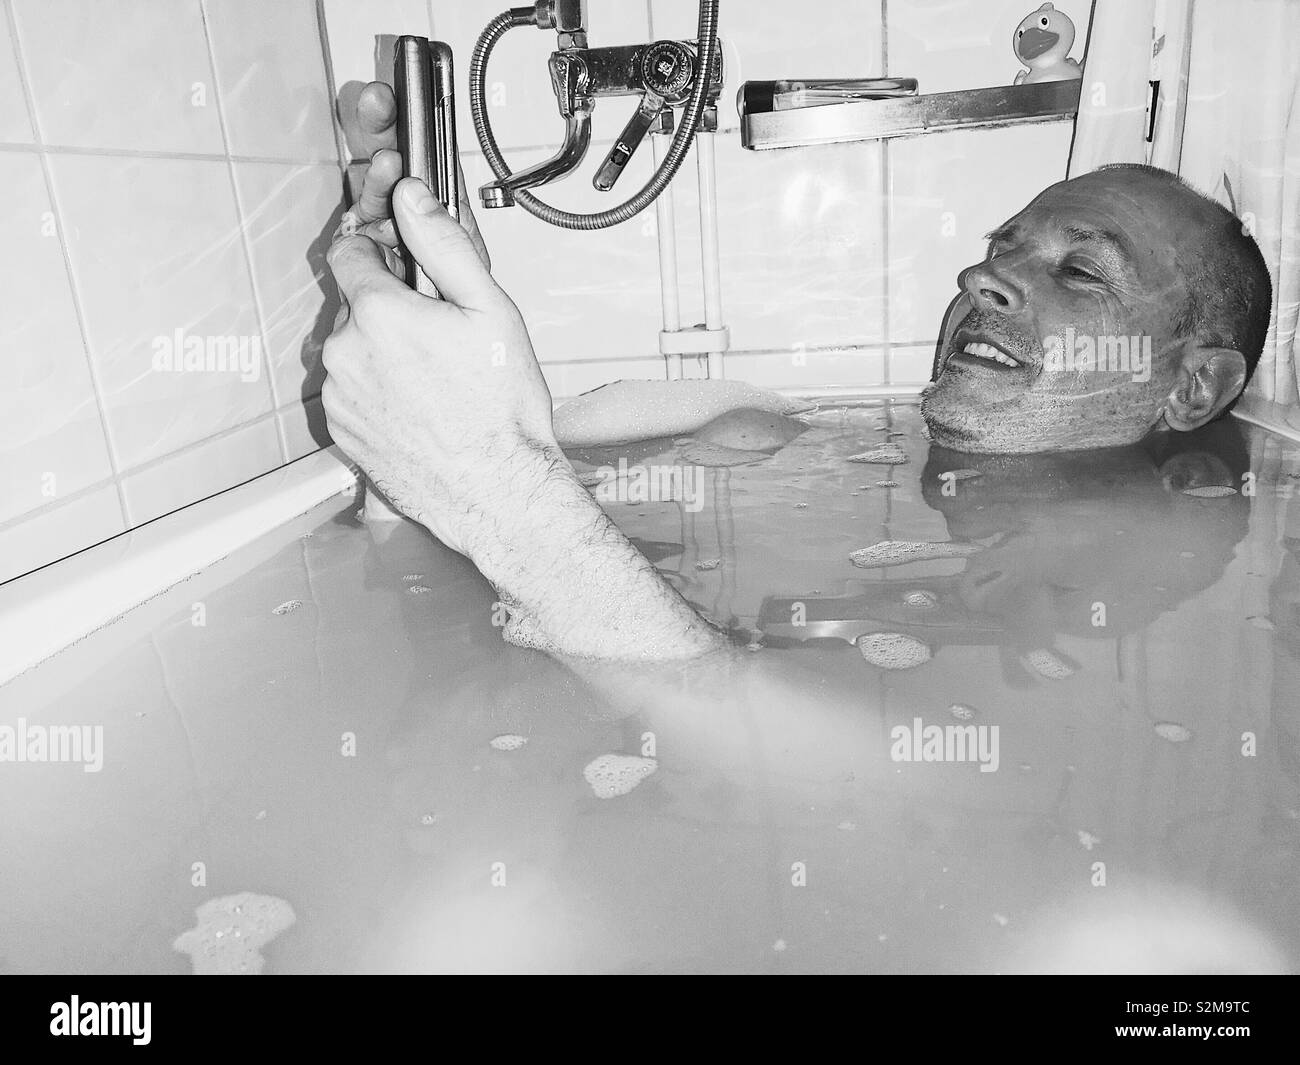 Middle aged smiling Swedish man in bath with smartphone, Sweden Stock Photo